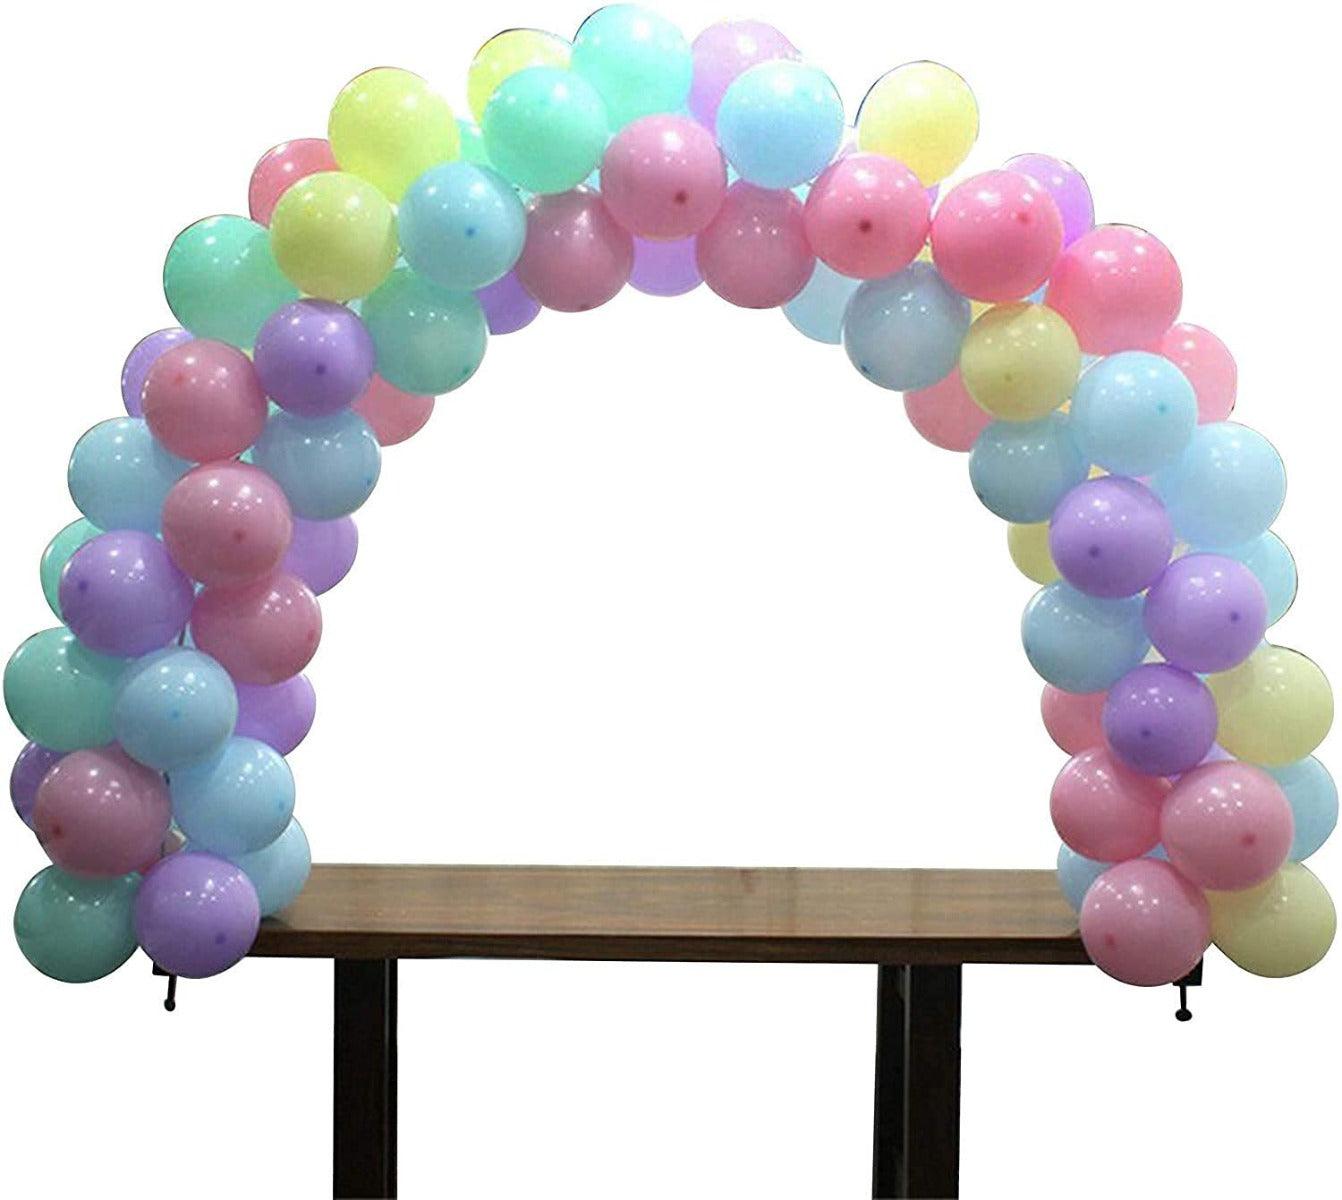 PartyCorp Adjustable Balloon Arches Table Stand For Party Decoration (Balloons Not Included), 1 pc